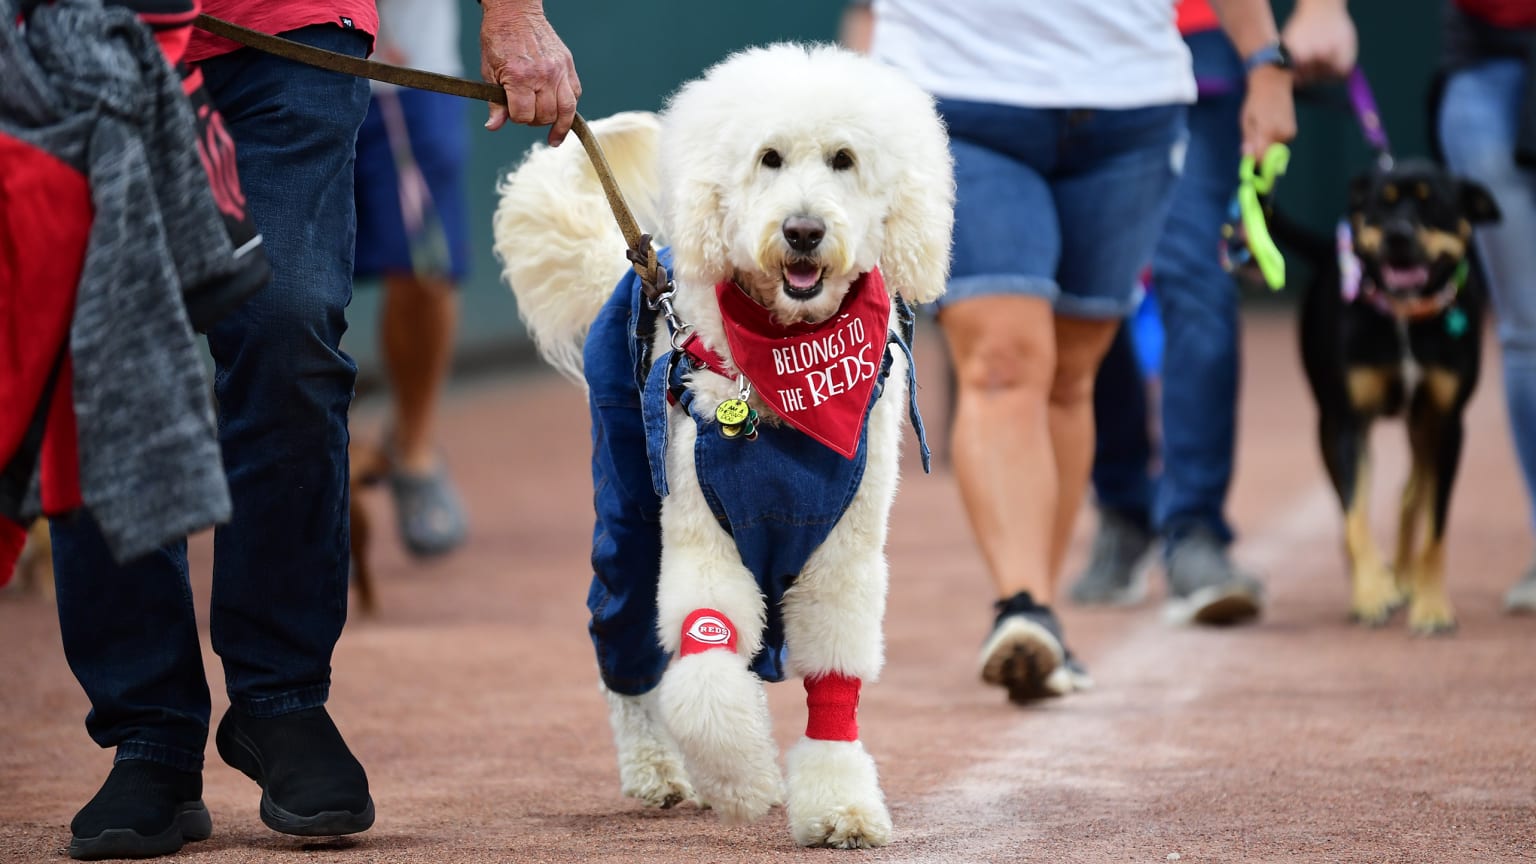 More than 200 pups take over Great American Ball Park for Bark at the Park